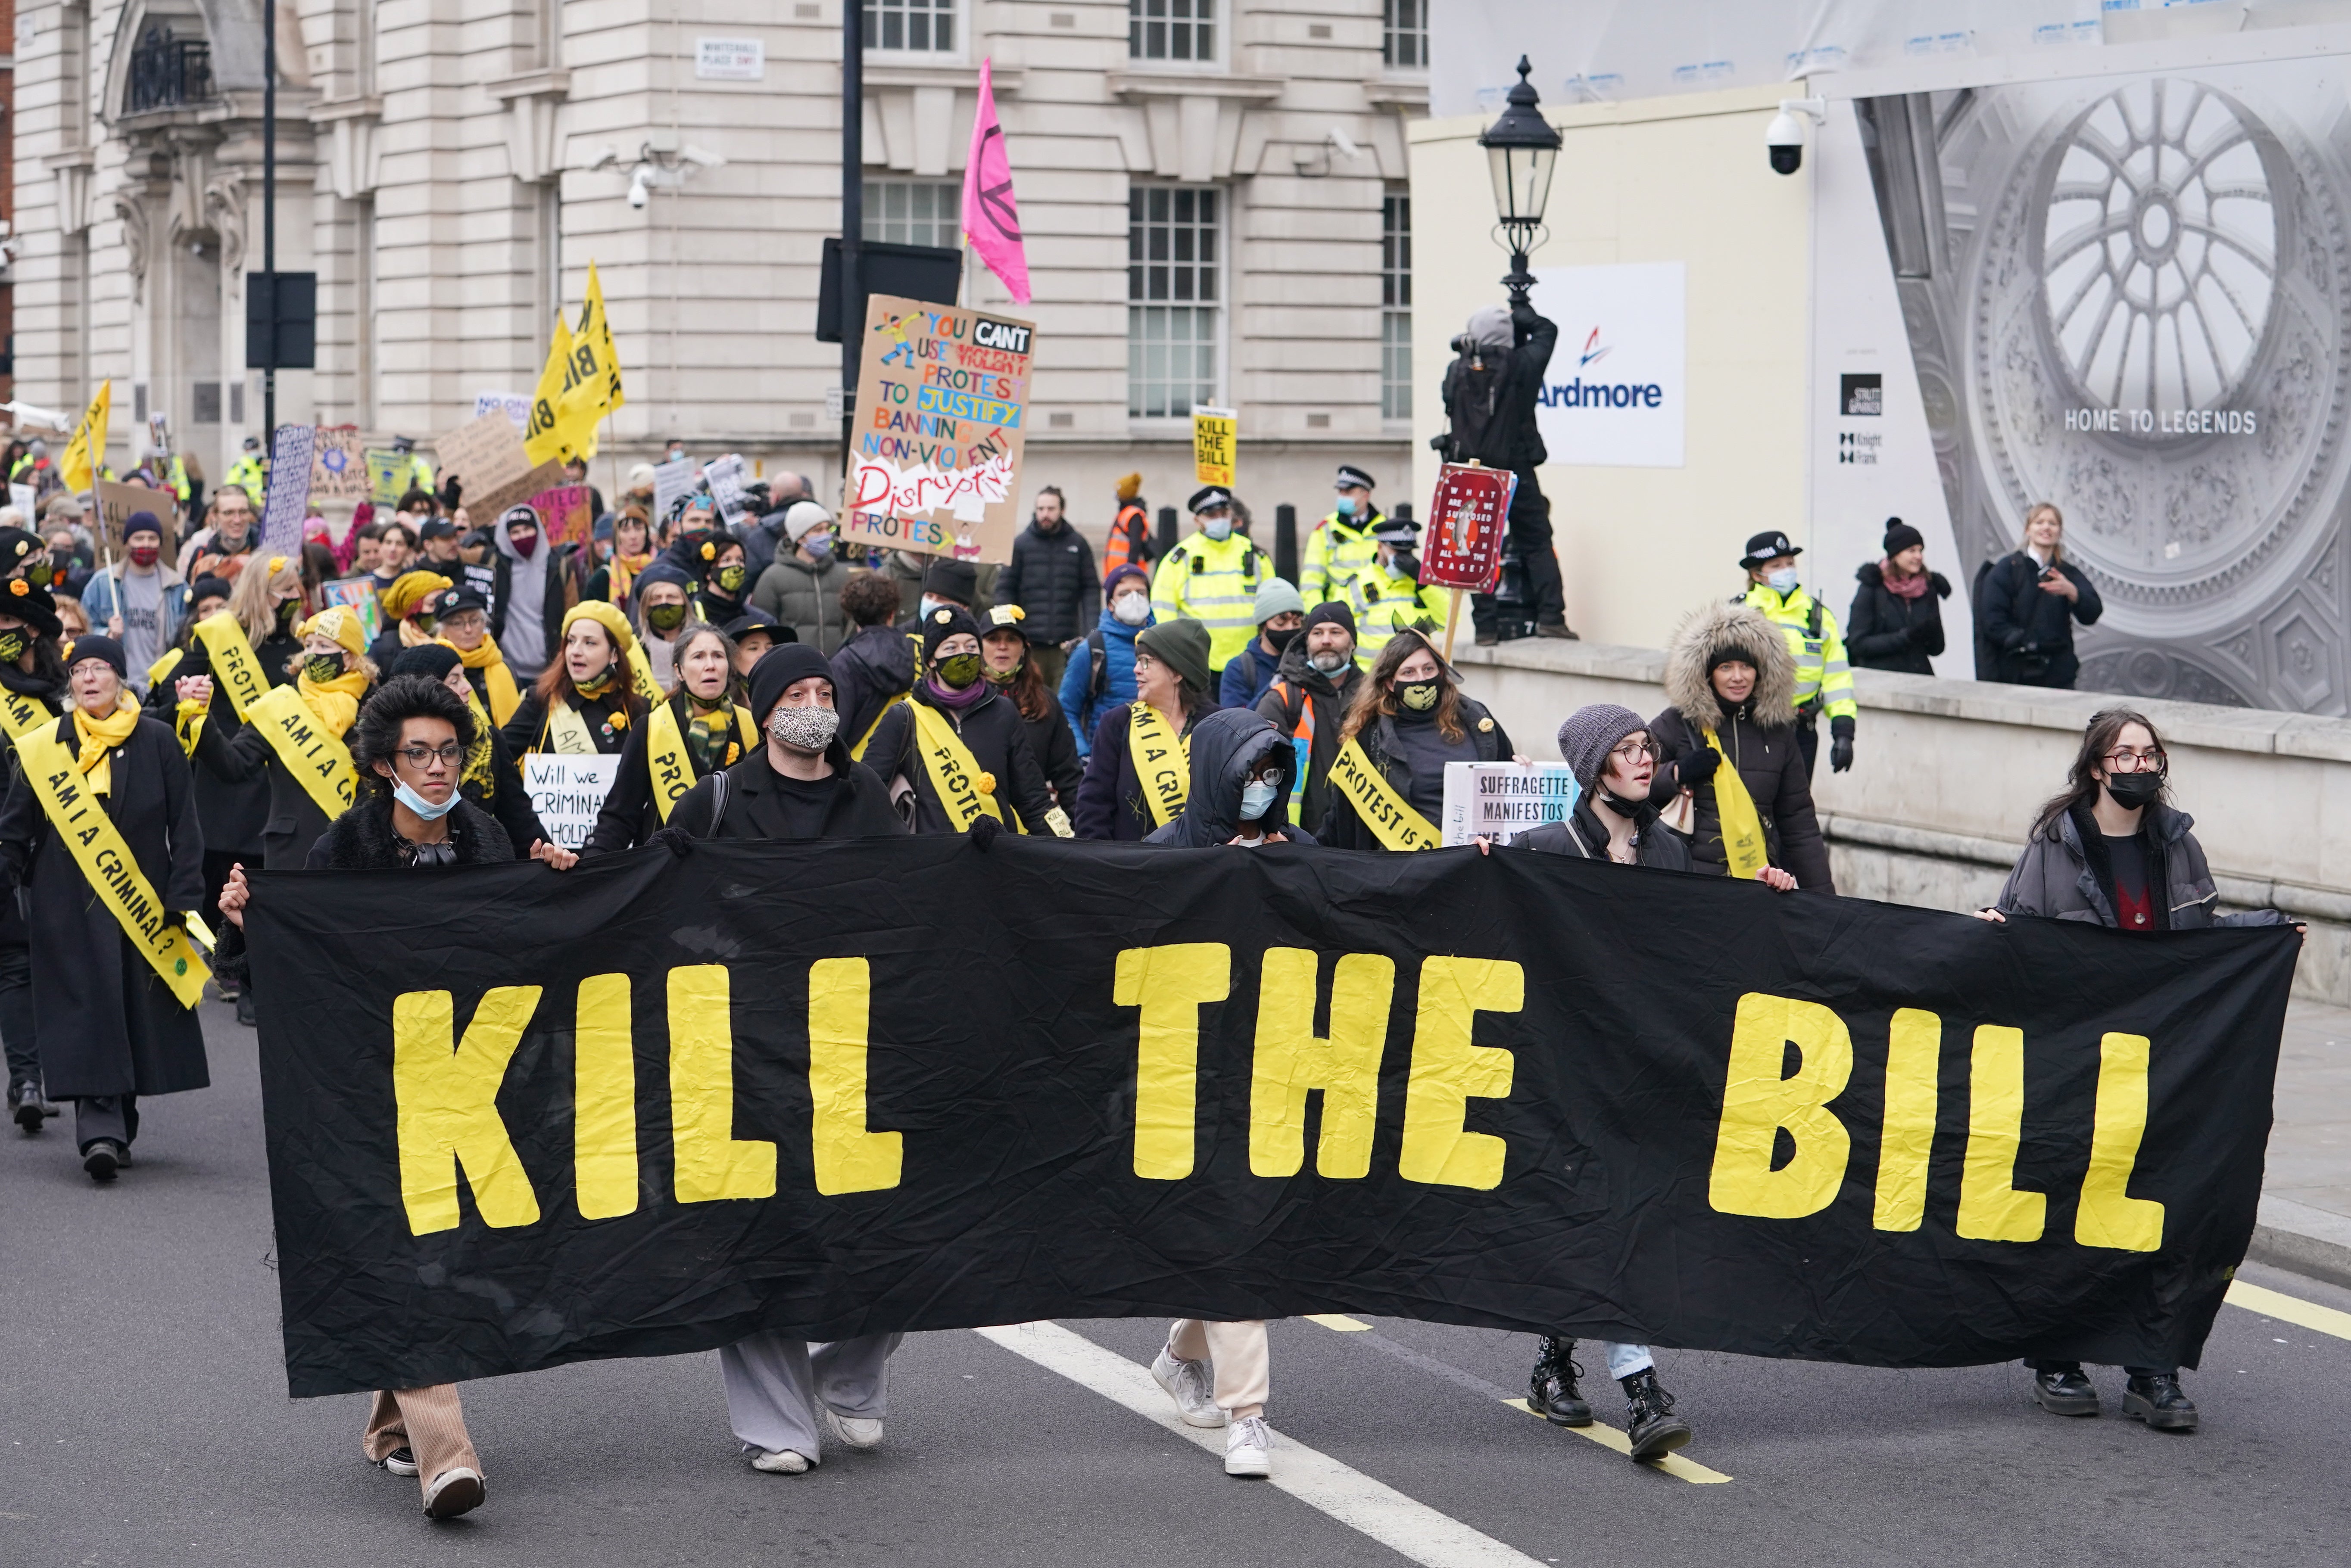 Demonstrators on Whitehall during a ‘Kill the Bill’ protest against the policing bill (Dominic Lipinski/PA)